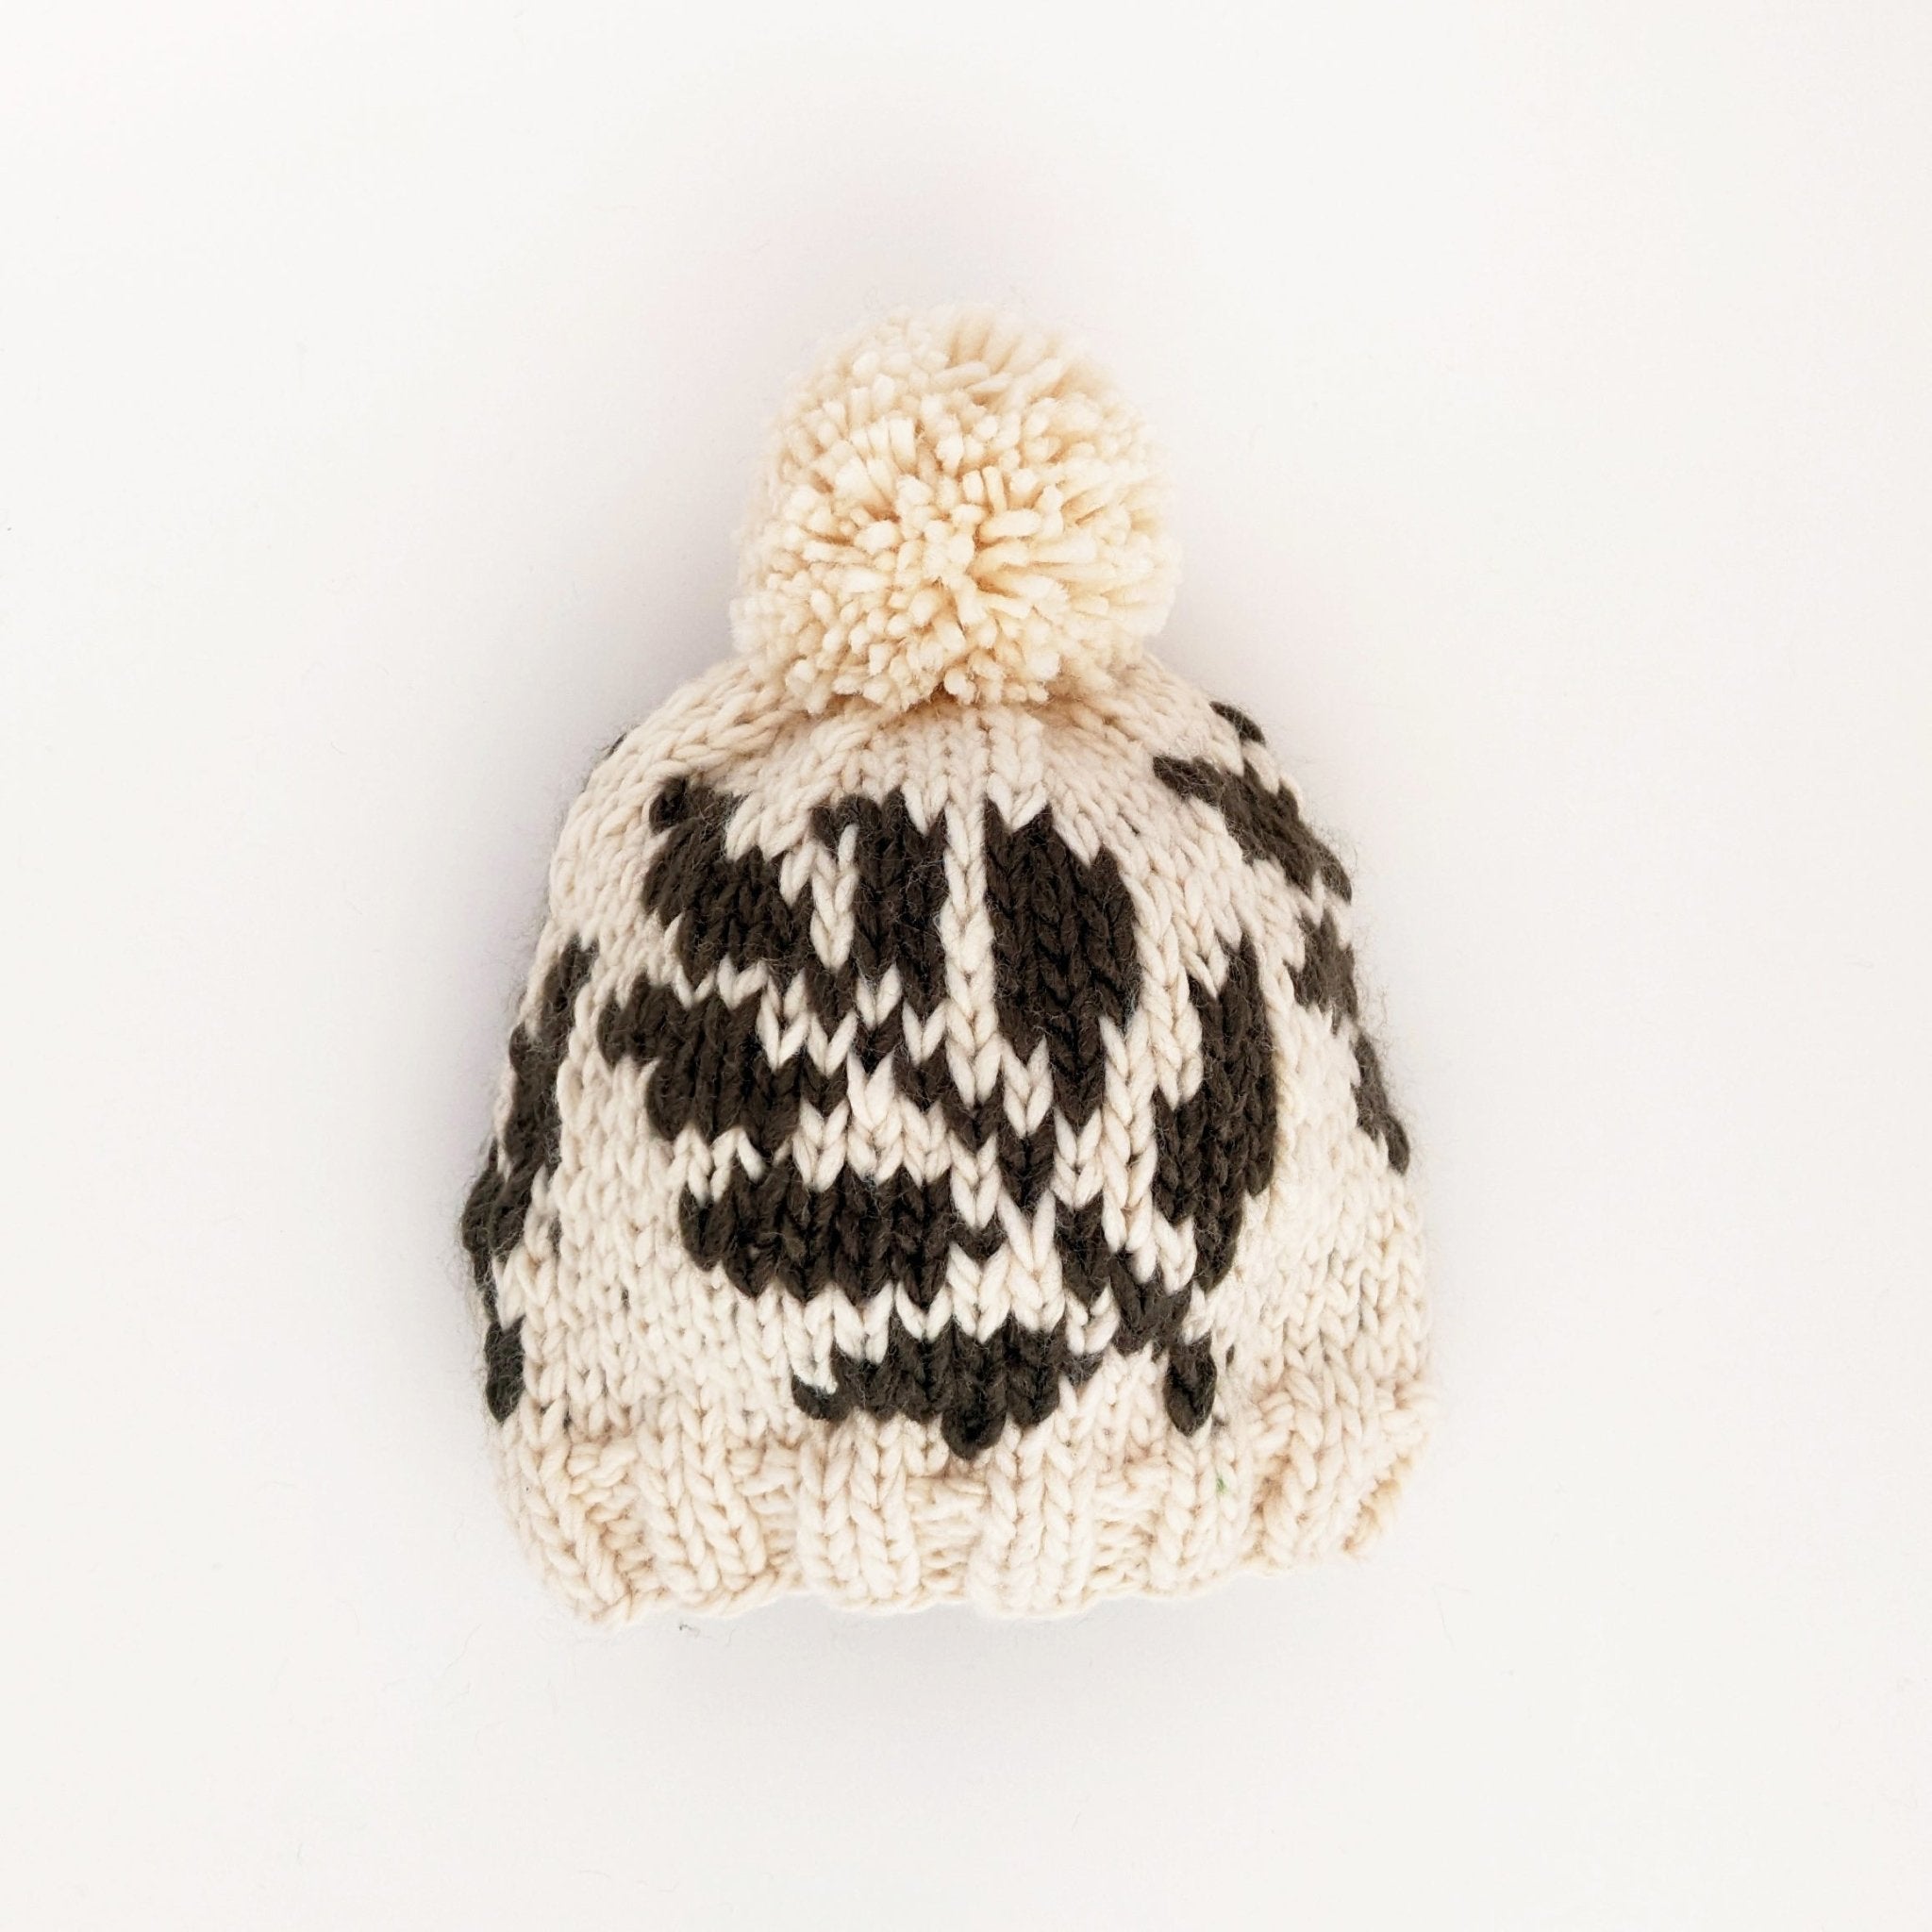 Huggalugs Loden Pom Pom Knitted Beanie Hat